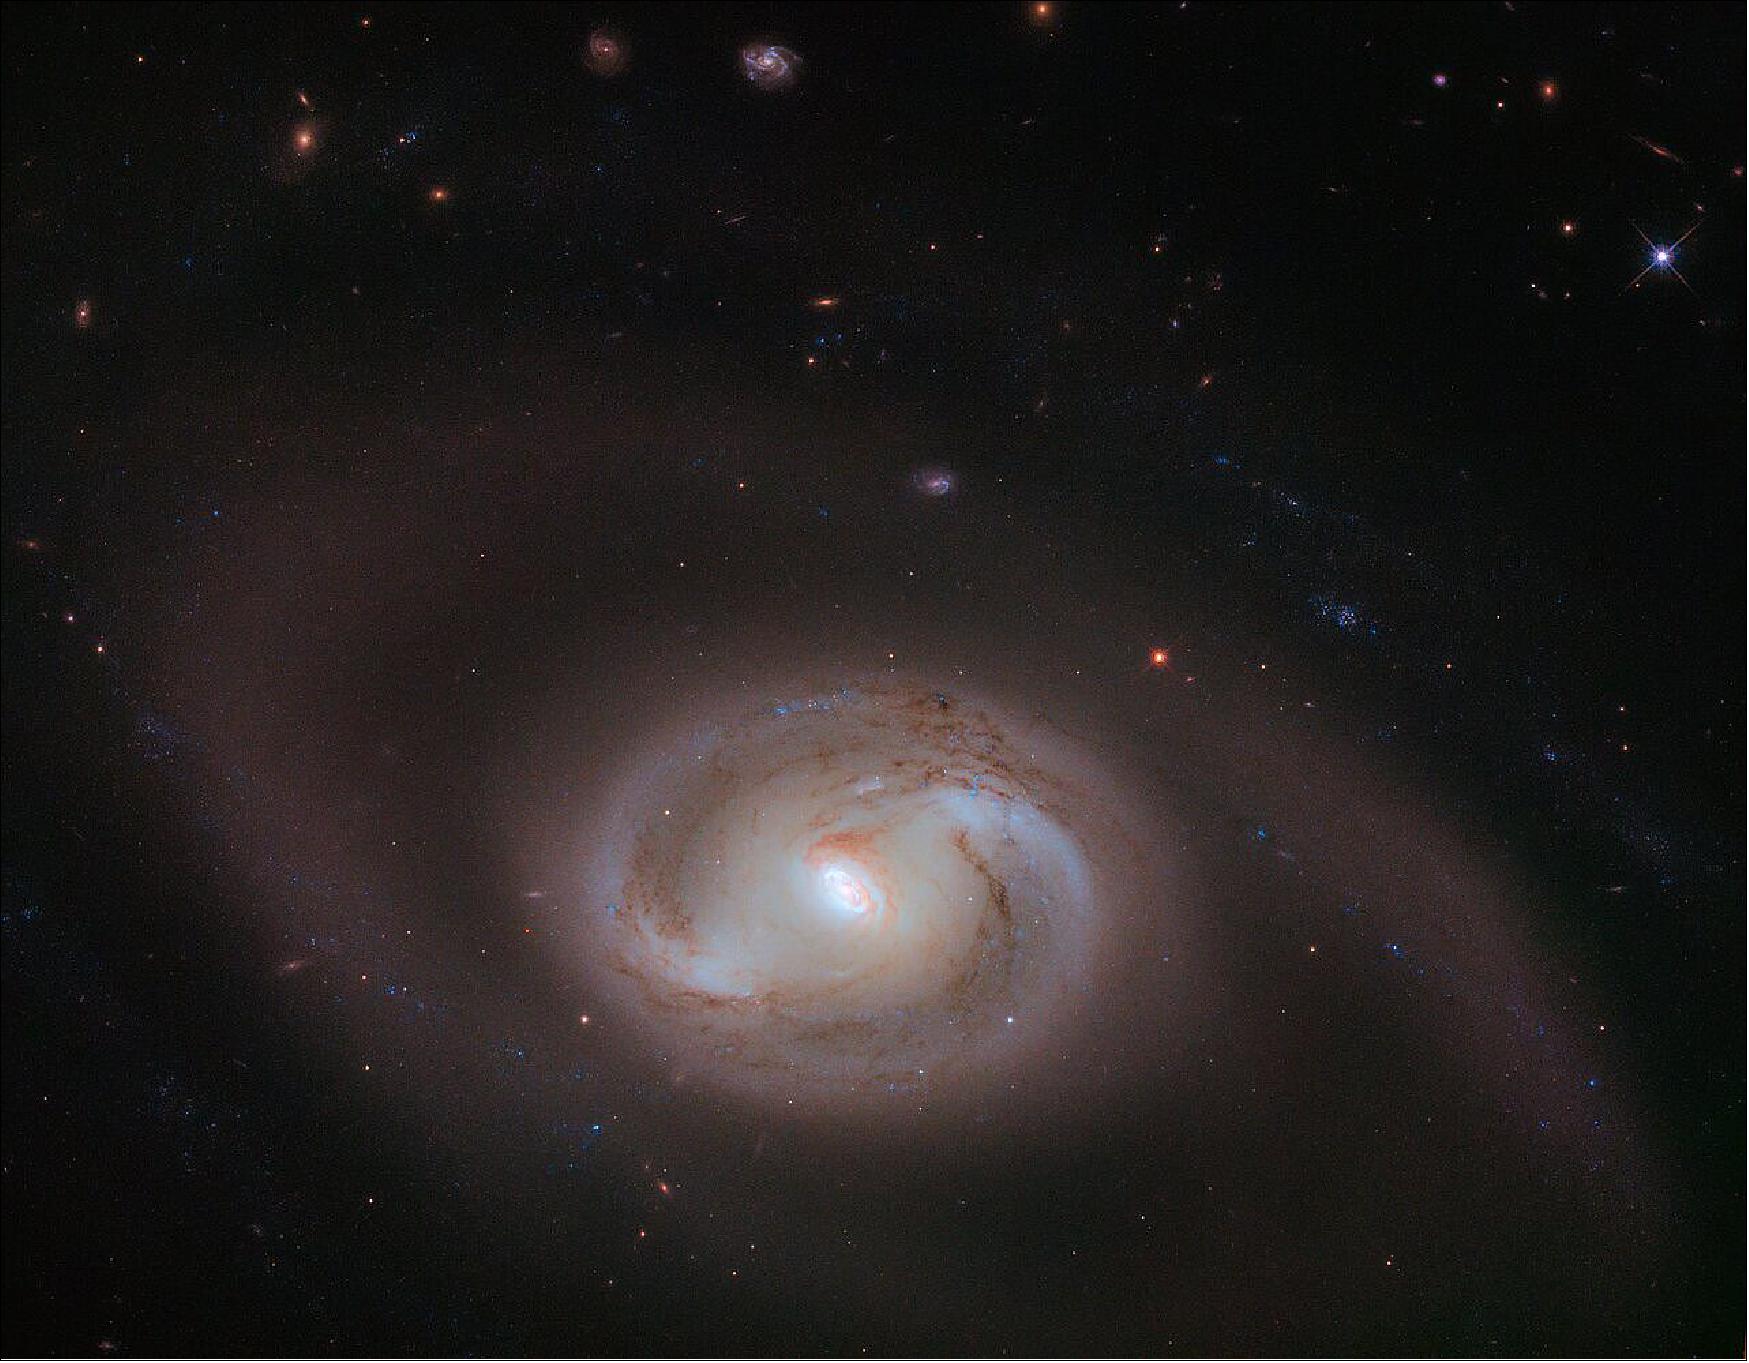 Figure 78: These rings are not the only unique feature of this galaxy. NGC 2273 is also a Seyfert galaxy, a galaxy with an extremely luminous core. In fact, the center of a galaxy such as this is powered by a supermassive black hole, and can glow brightly enough to outshine an entire galaxy like the Milky Way (image credit: ESA/Hubble & NASA, J. Greene; CC BY 4.0)